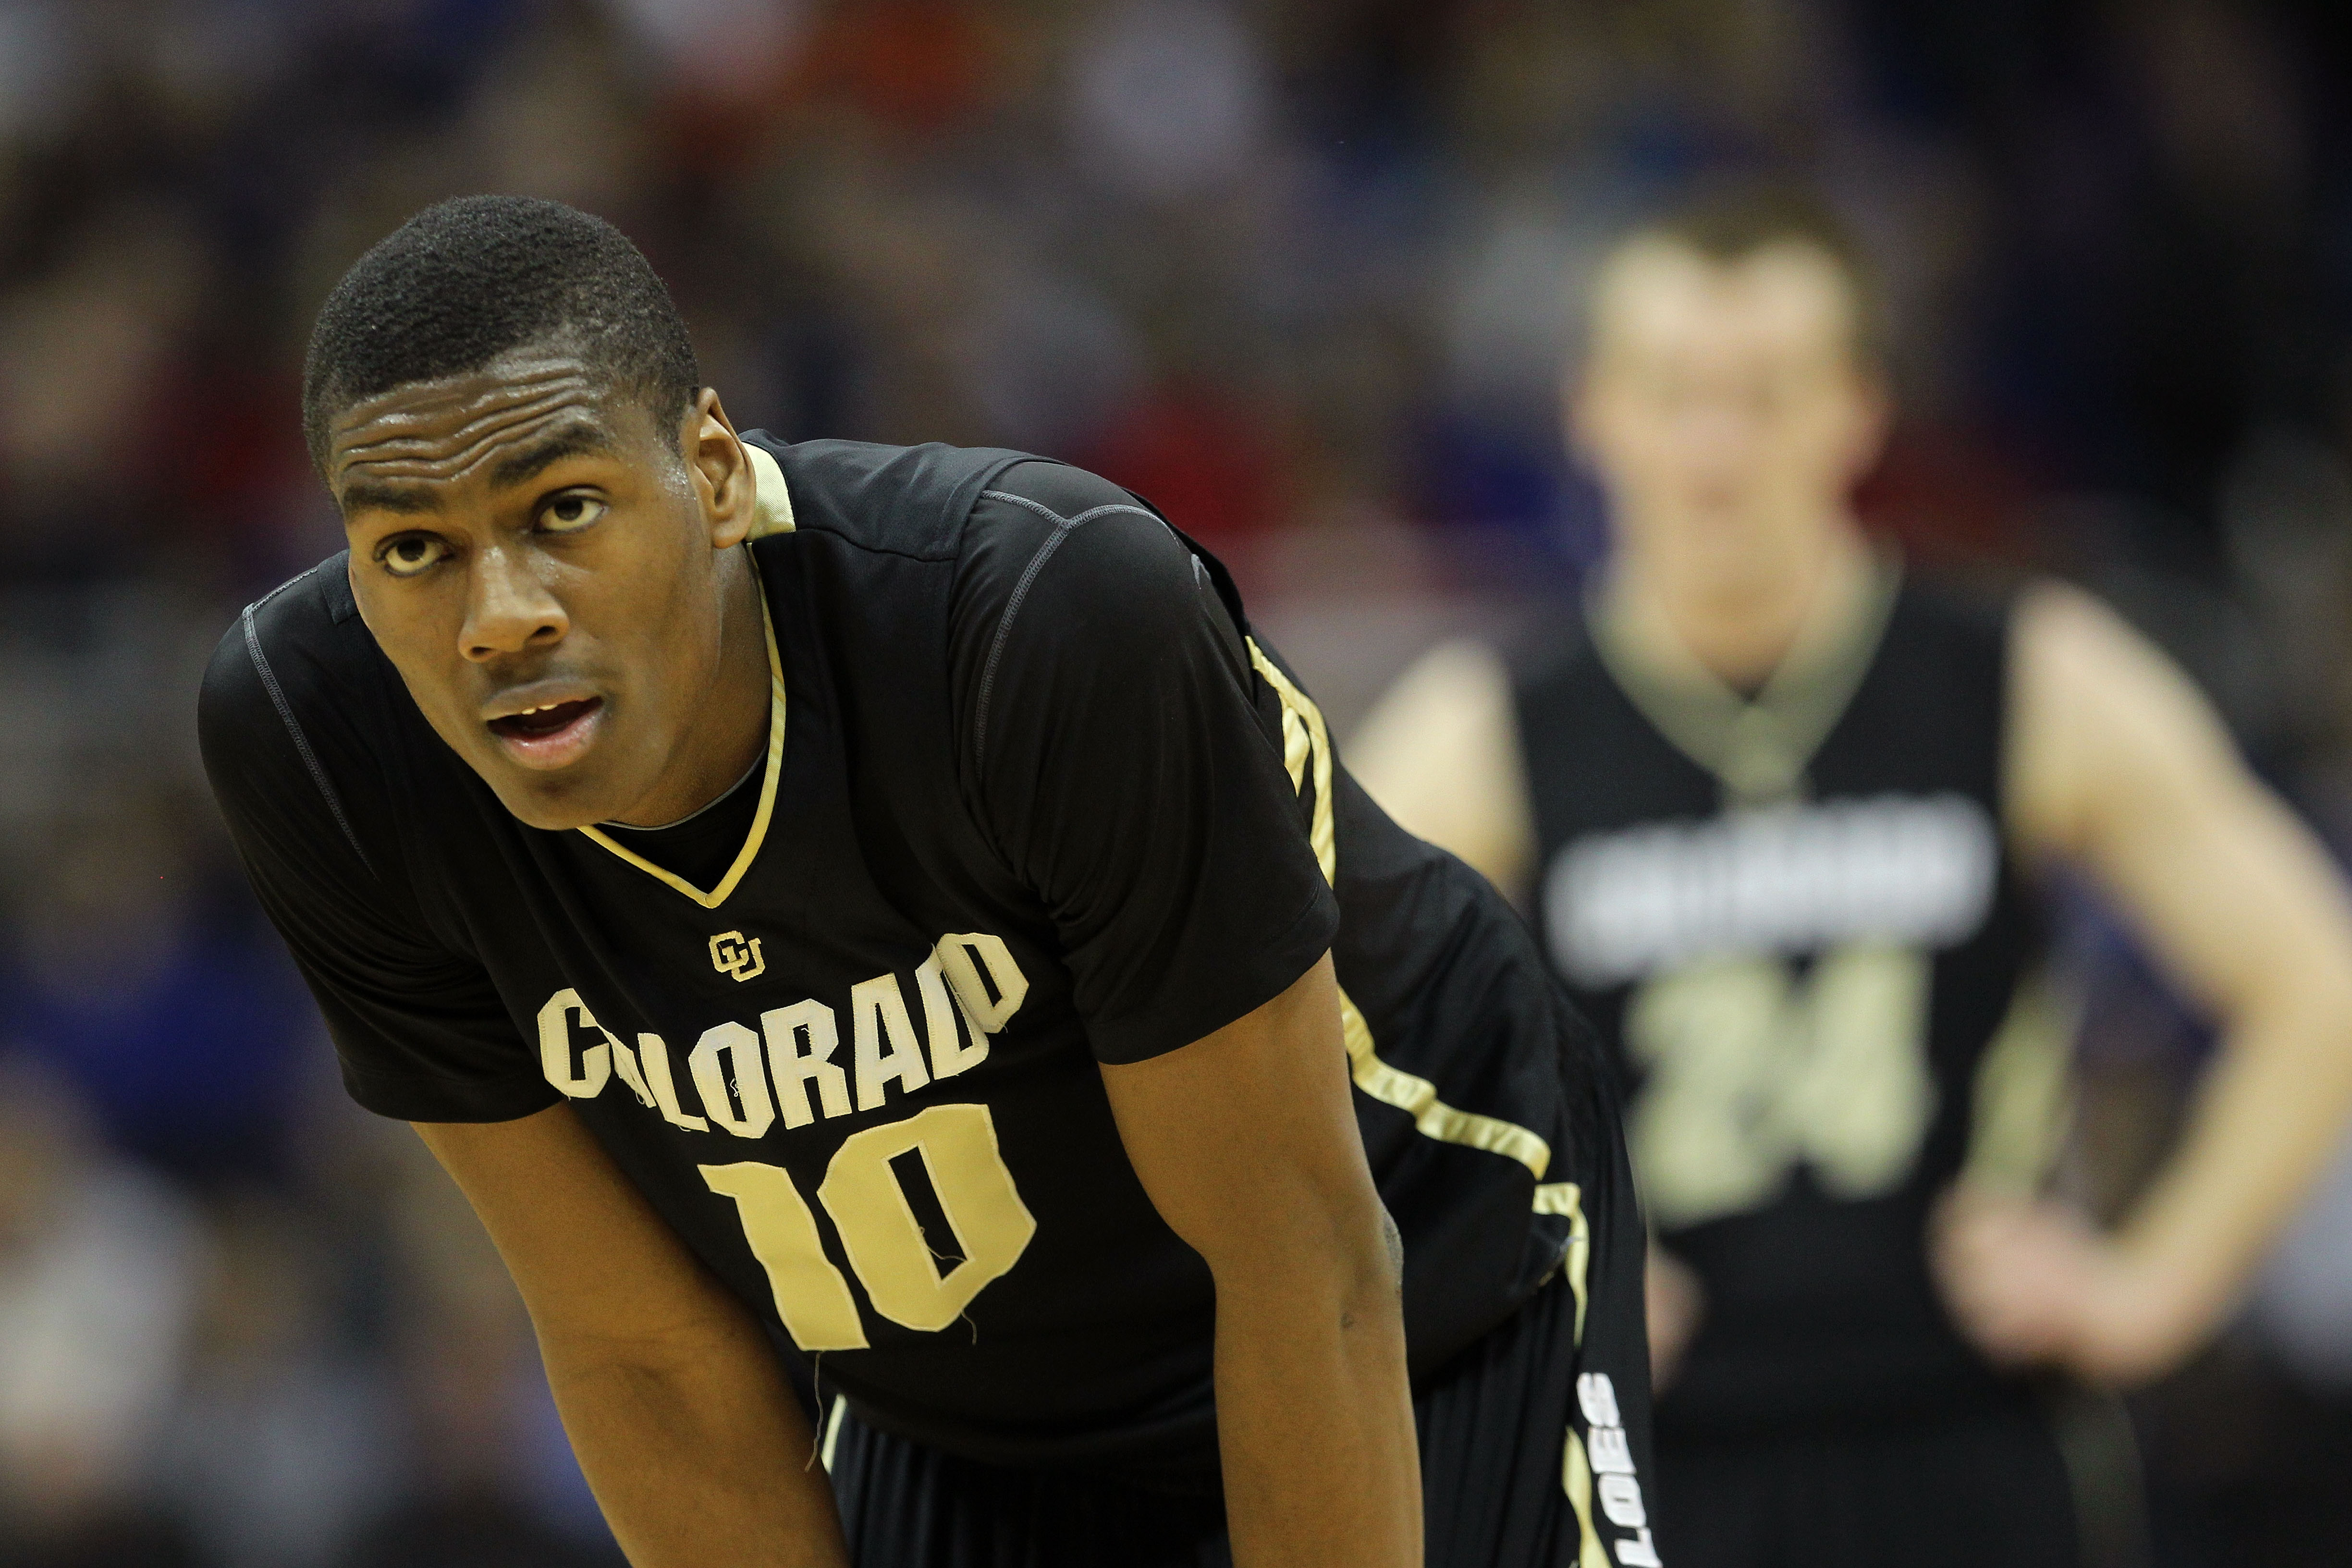 KANSAS CITY, MO - MARCH 10:  Alec Burks #10 of the Colorado Buffaloes stands on the court against the Kansas State Wildcats during their quarterfinal game in the 2011 Phillips 66 Big 12 Men's Basketball Tournament at Sprint Center on March 10, 2011 in Kan